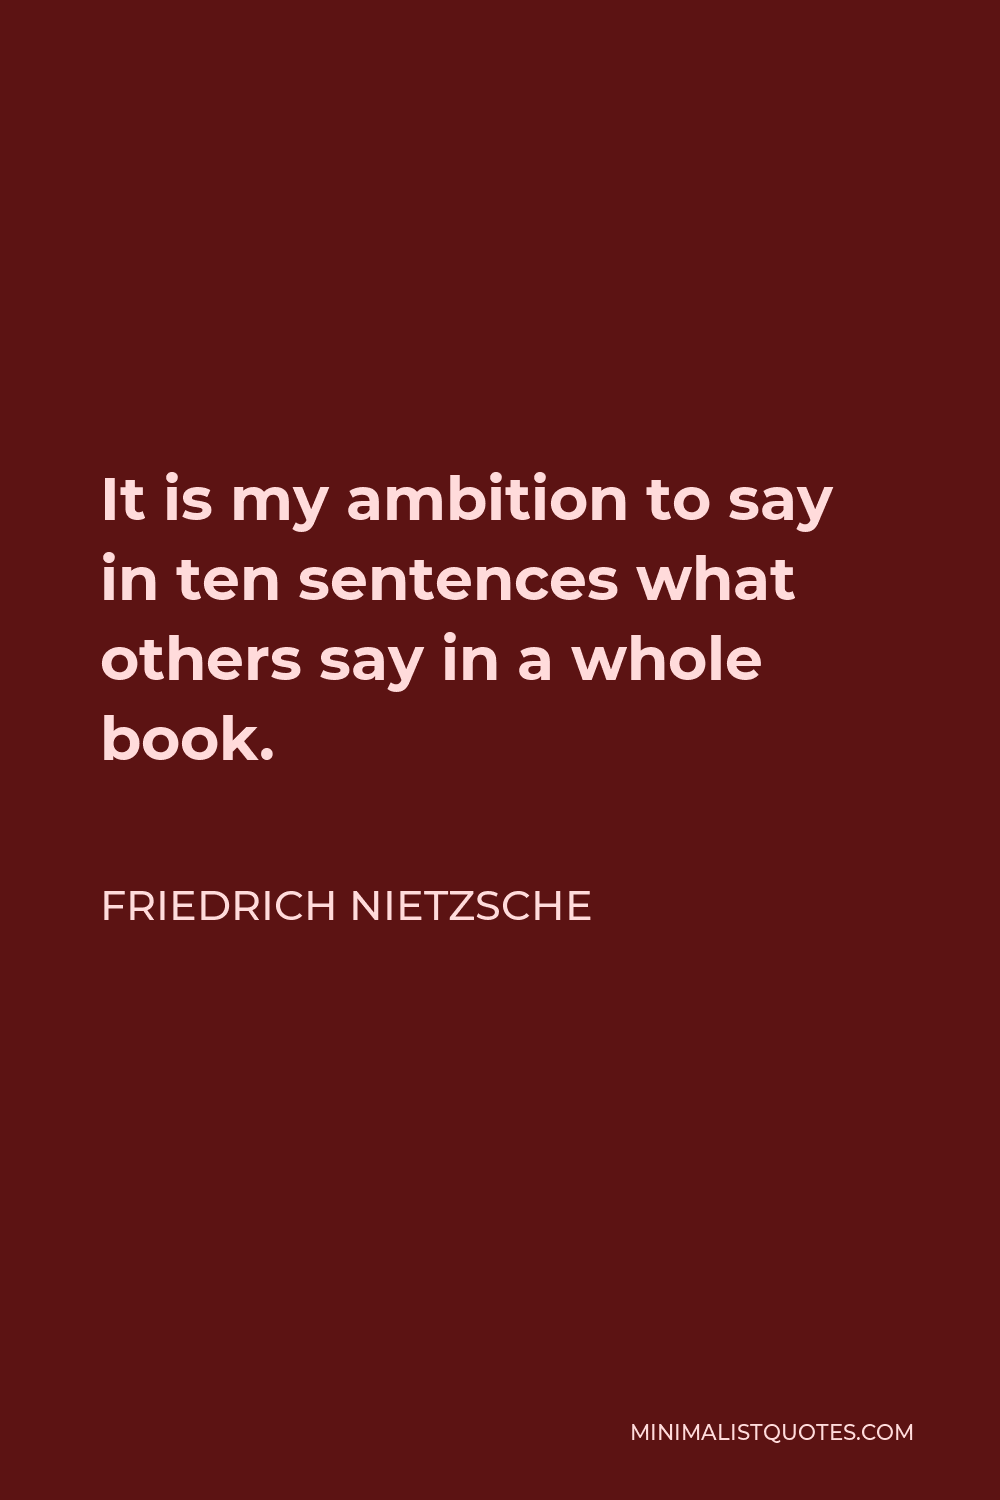 Friedrich Nietzsche Quote - It is my ambition to say in ten sentences what others say in a whole book.